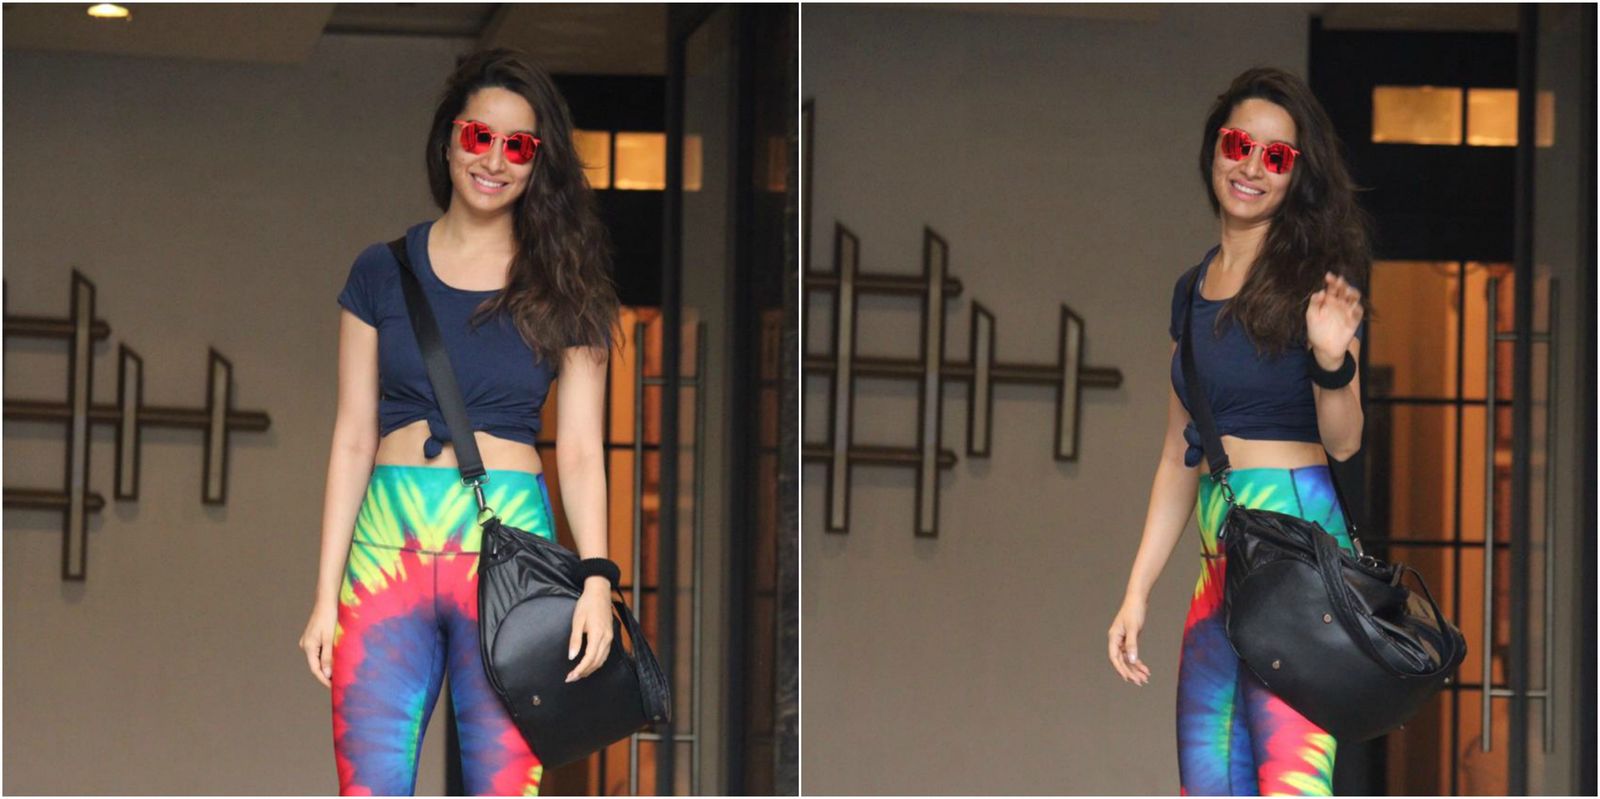 Shraddha Kapoor’s Gym Look Is Perfect To Add Some Color To You Athleisure Collection